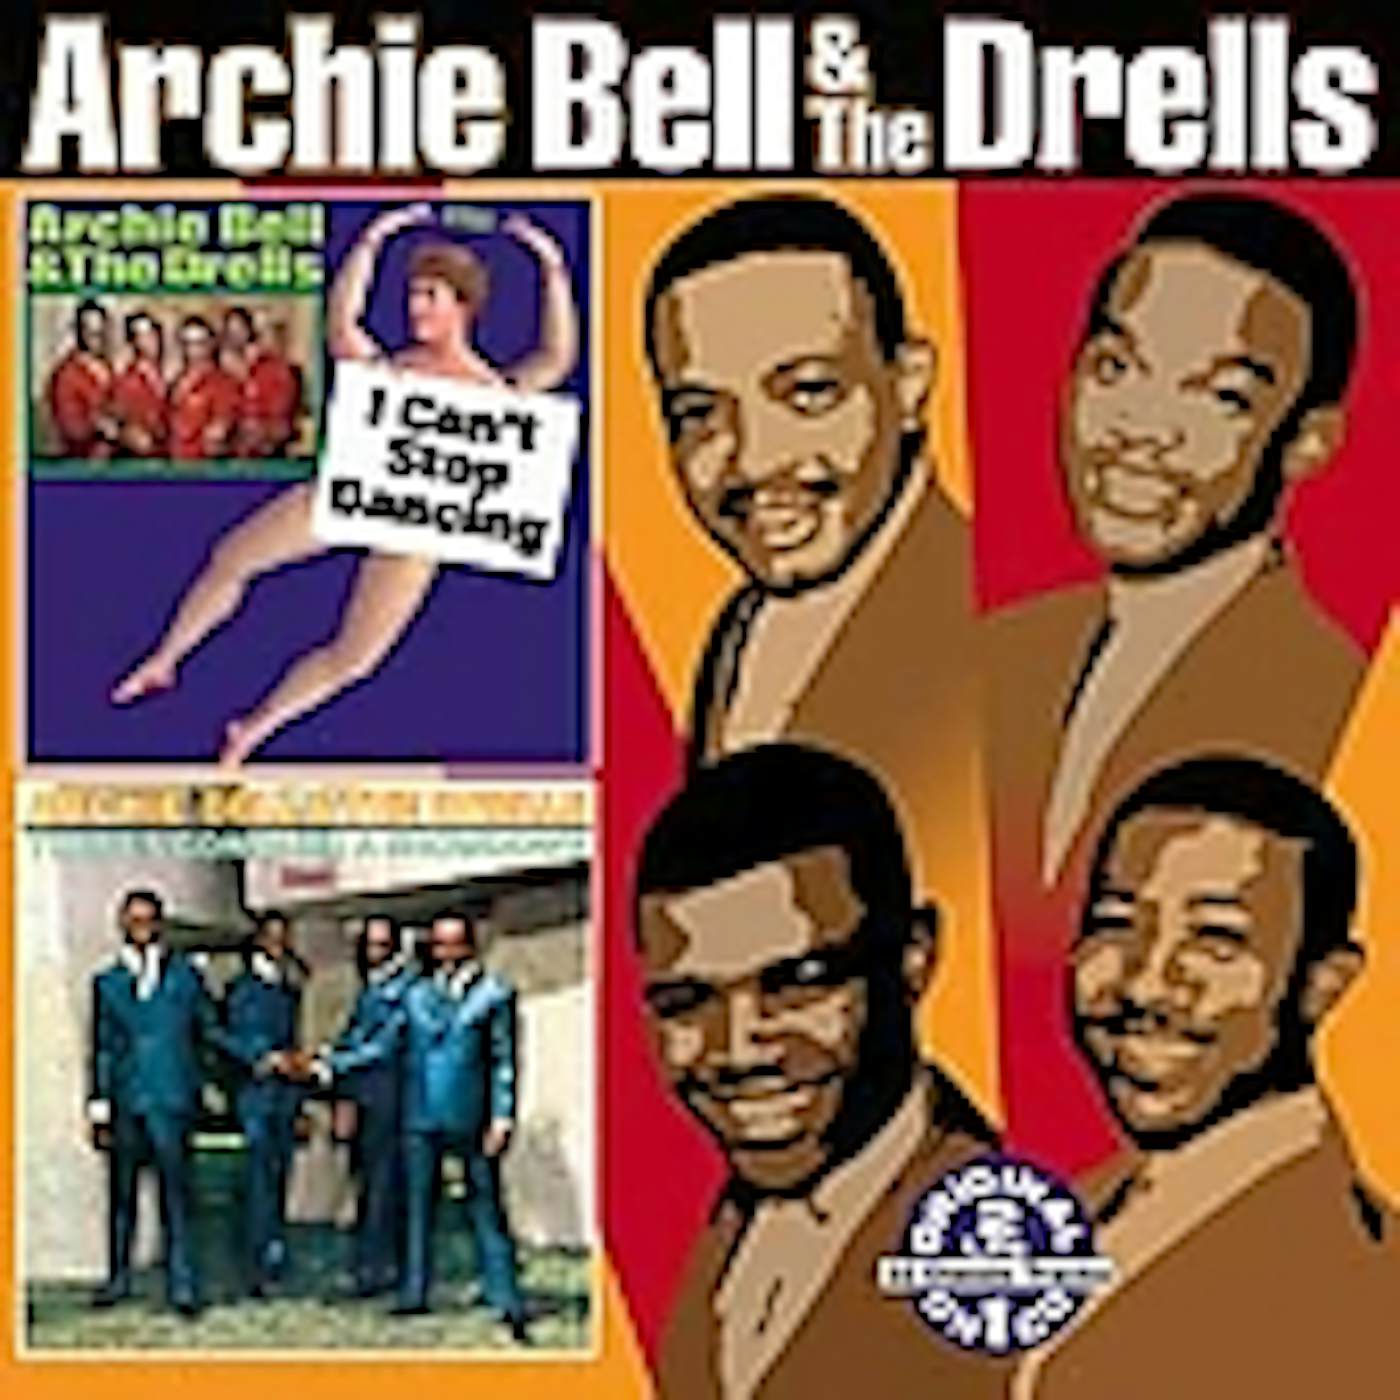 Archie Bell & The Drells I CAN'T STOP DANCING: THERE'S GONNA BE A SHOWDOWN CD